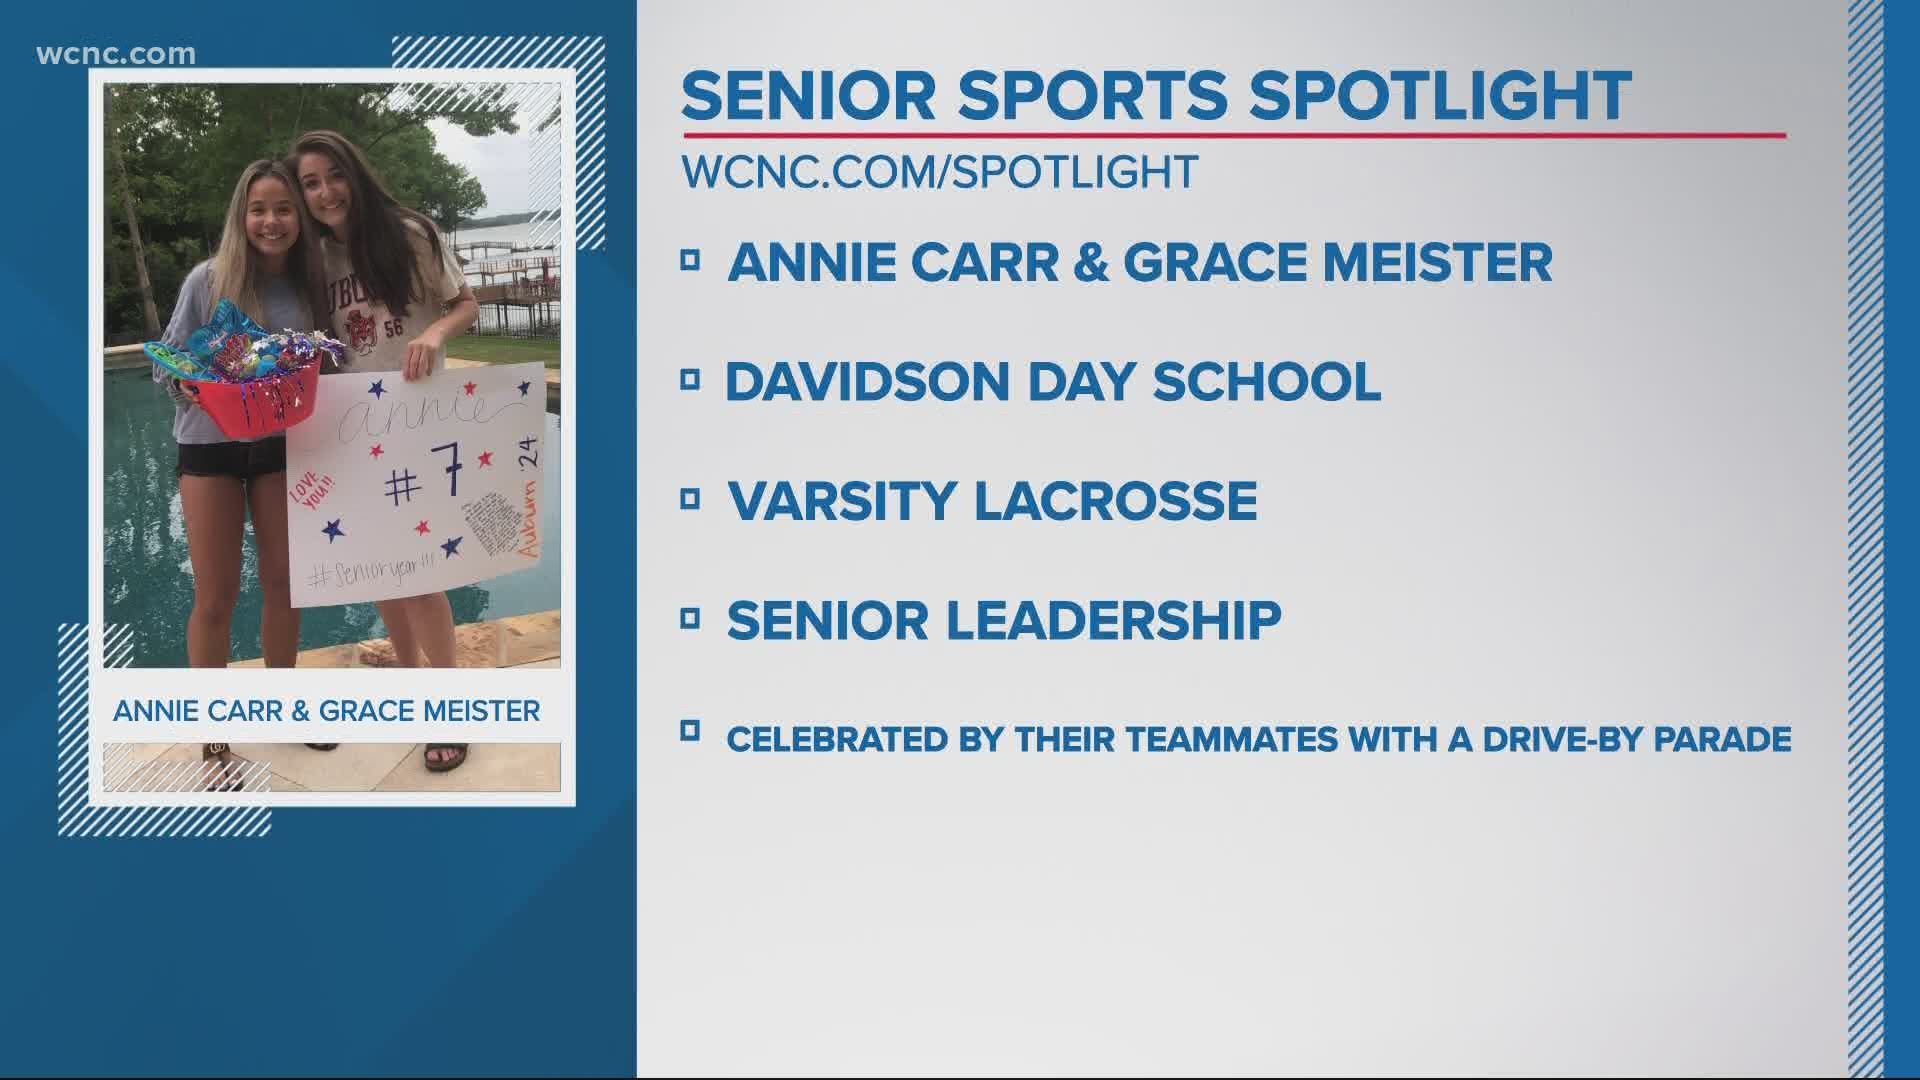 Annie Carr and Grace Meister played for the Davidson Day School Varsity Lacrosse team.